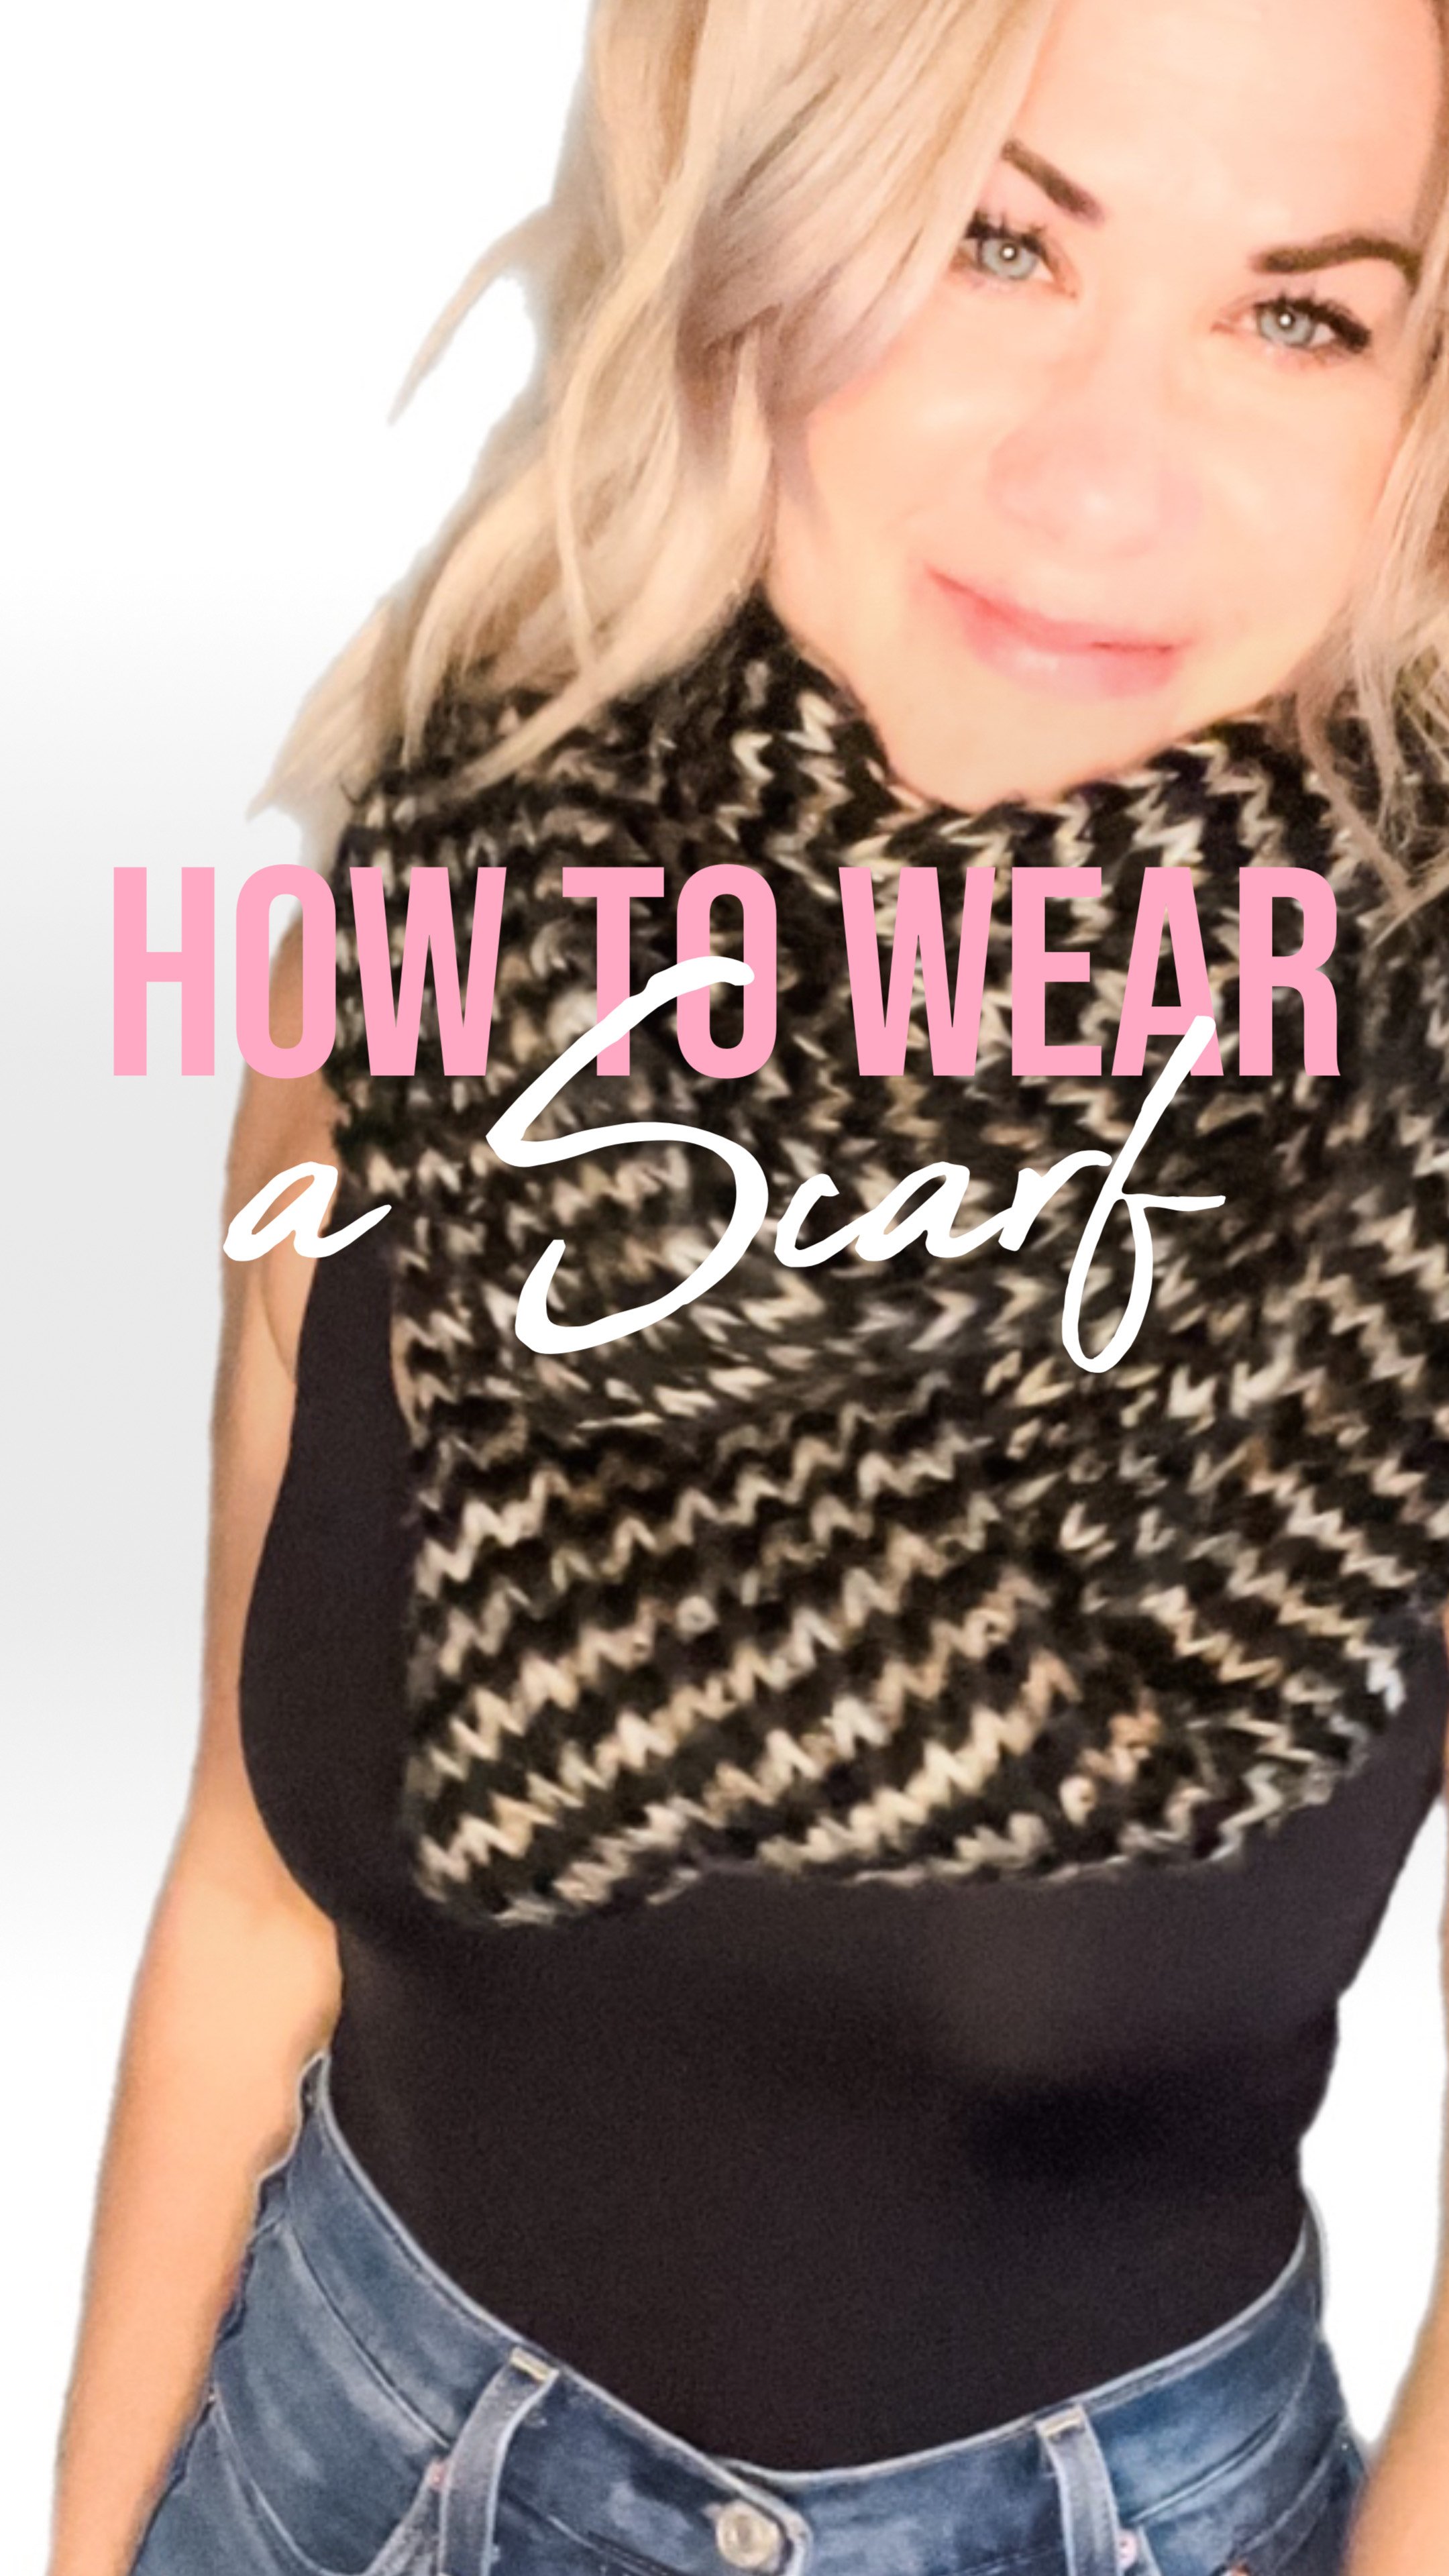 Welcome to your complete guide on HOW TO WEAR A SCARF!